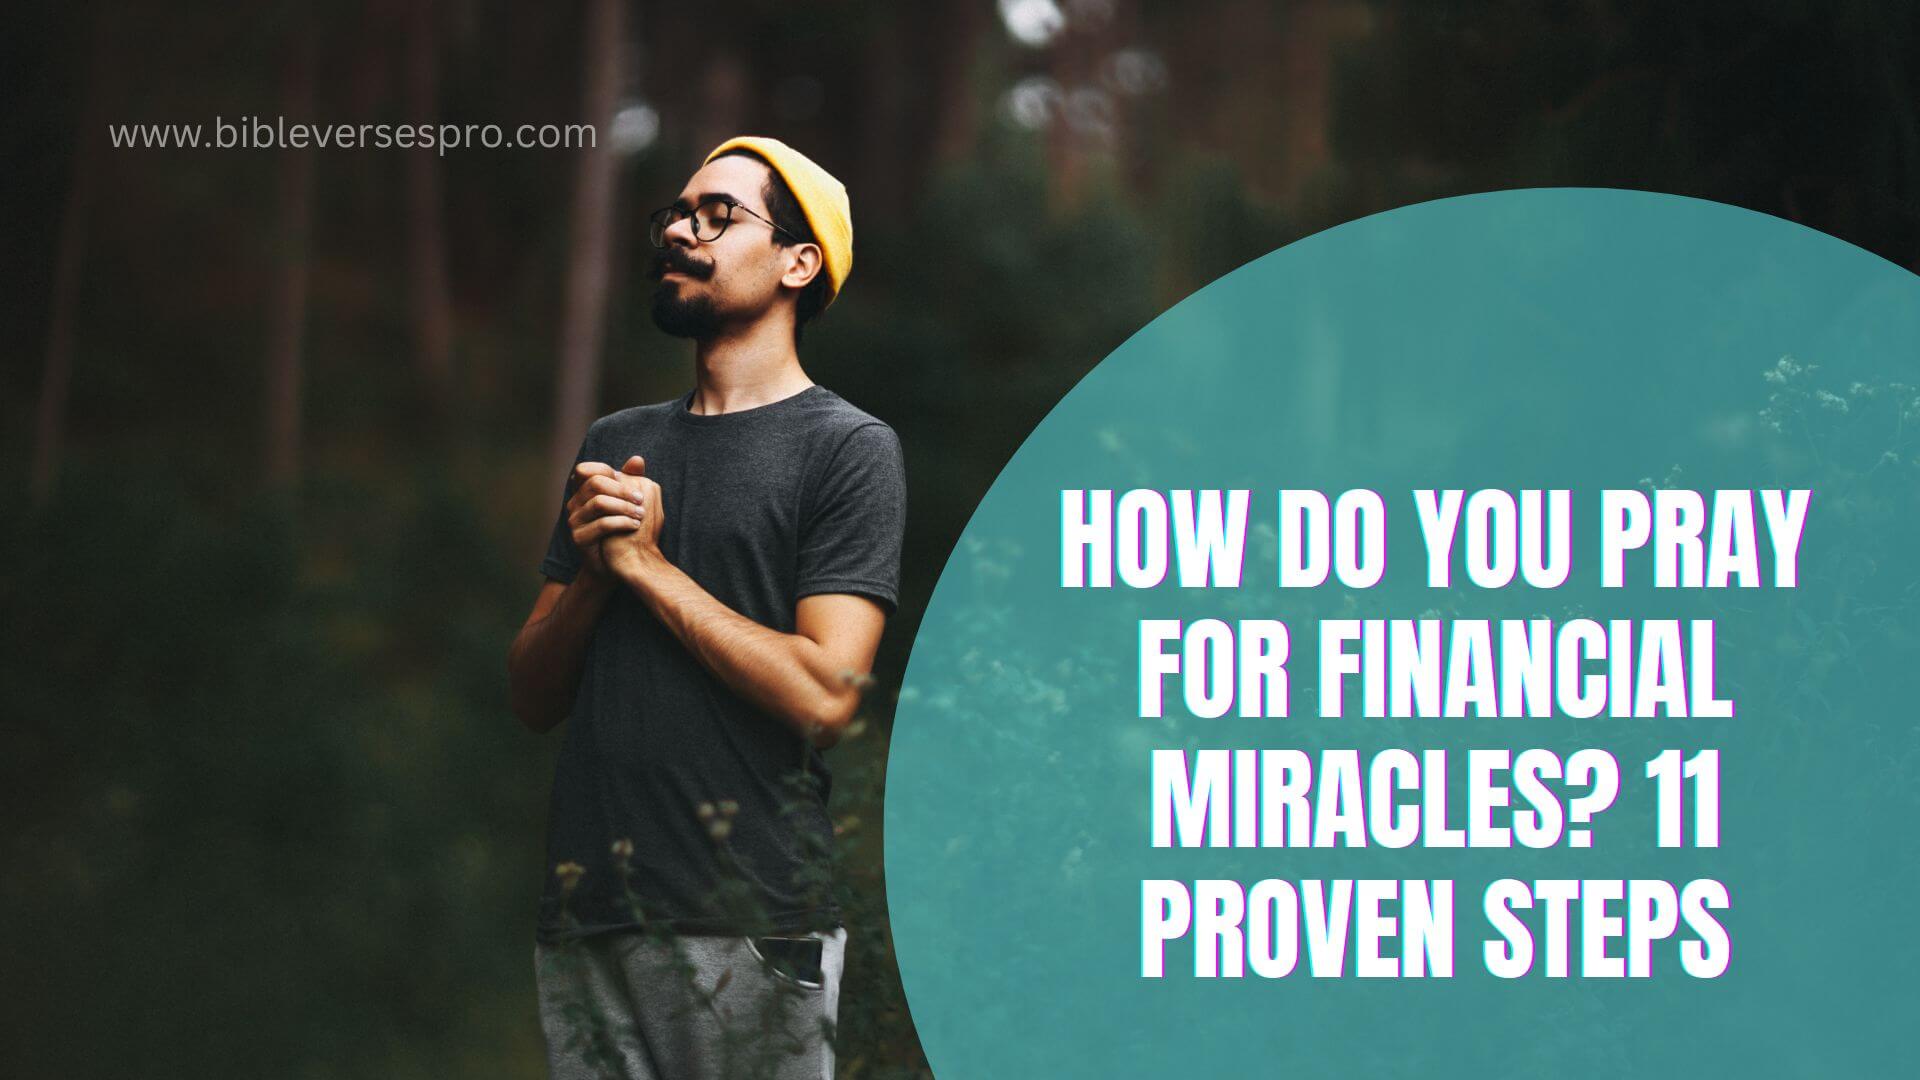 How Do You Pray for Financial Miracles (1)